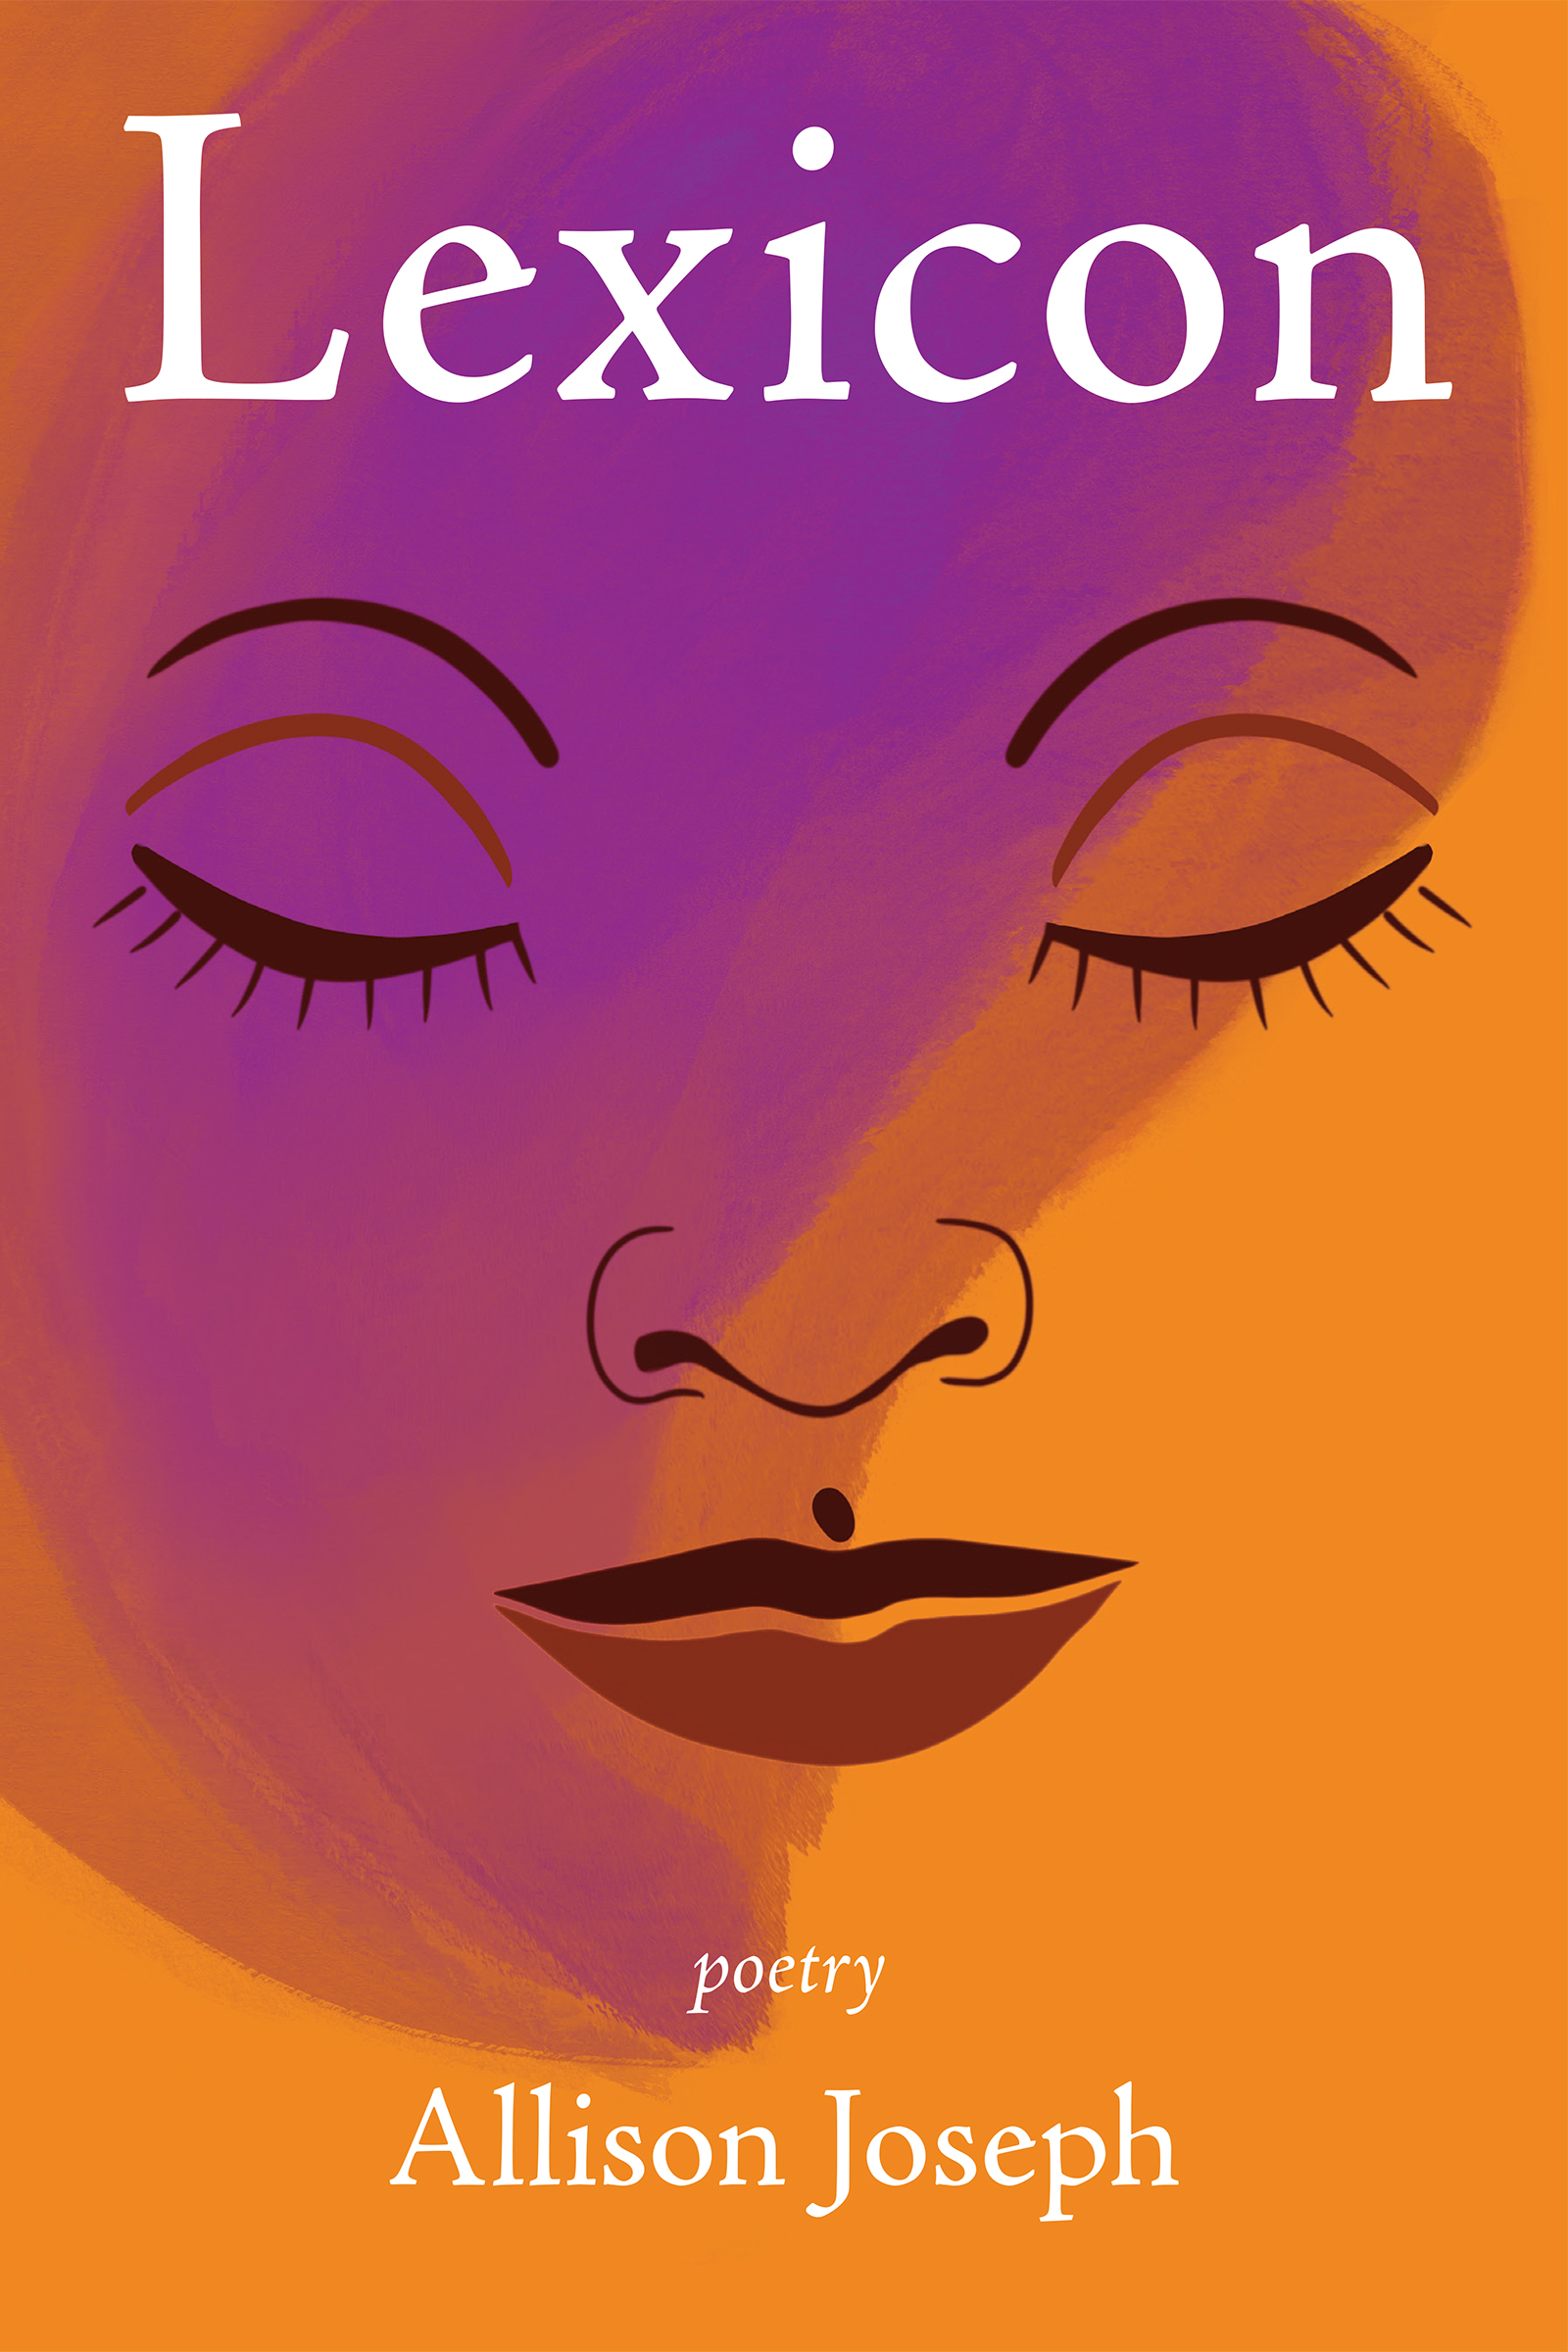 A purple and orange cover with a graphic design of a woman’s face in the center and white script that reads Lexicon poetry by Allison Joseph.